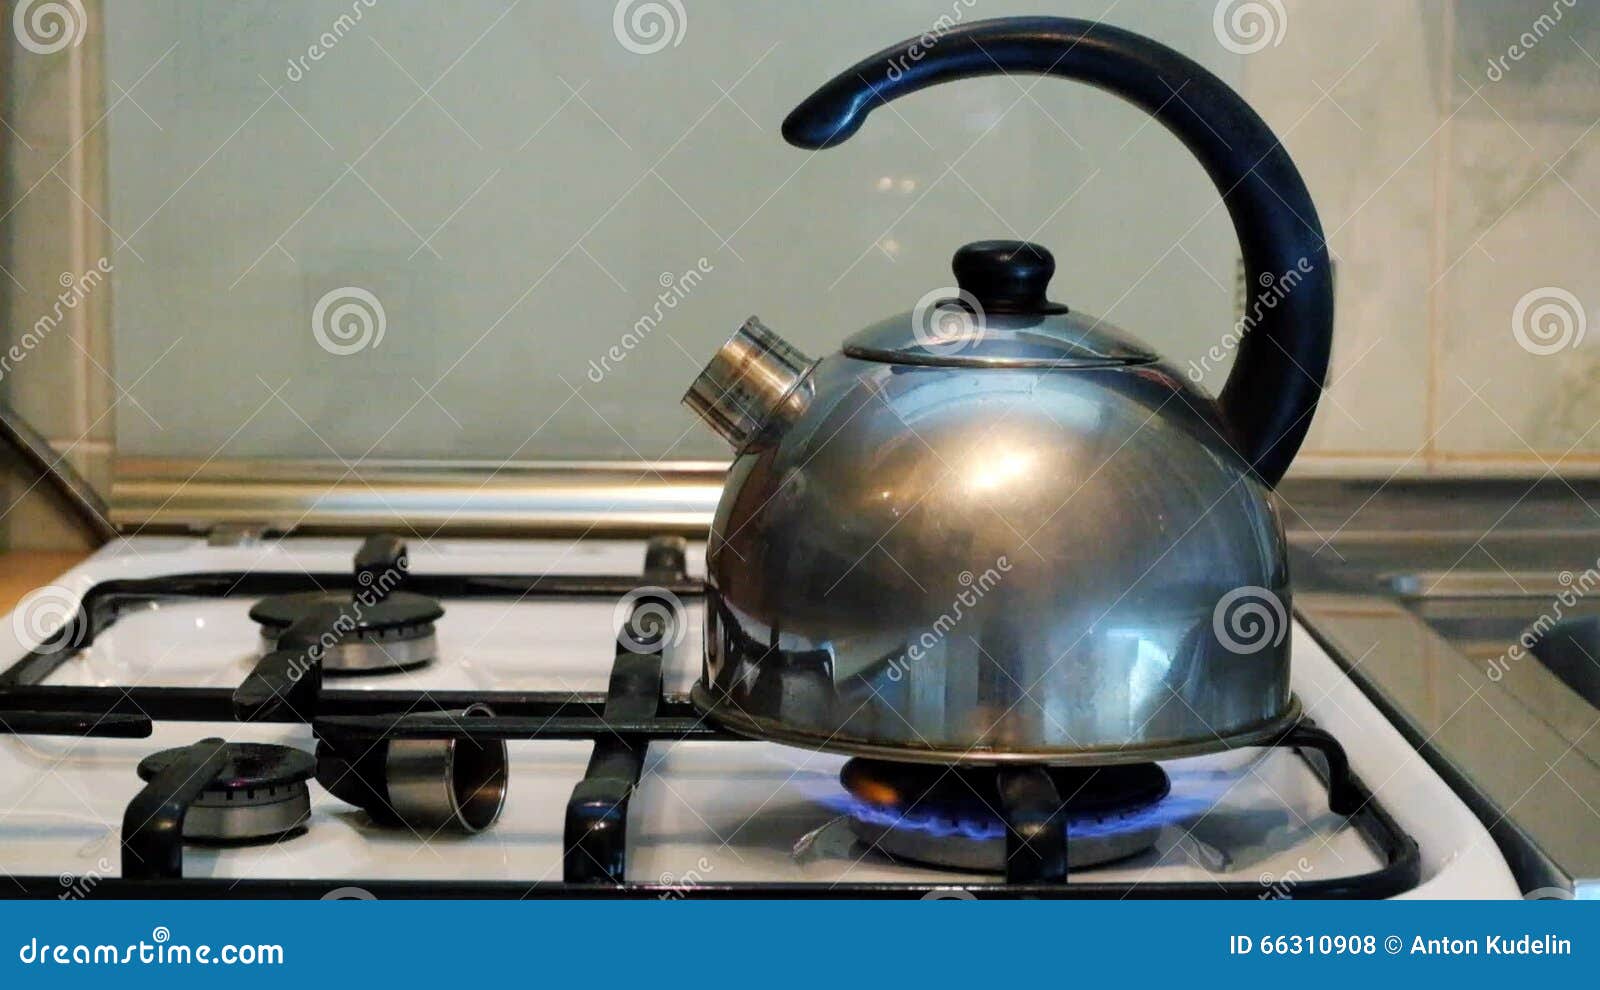 https://thumbs.dreamstime.com/z/water-boils-kettle-gas-stove-kitchen-whistle-66310908.jpg